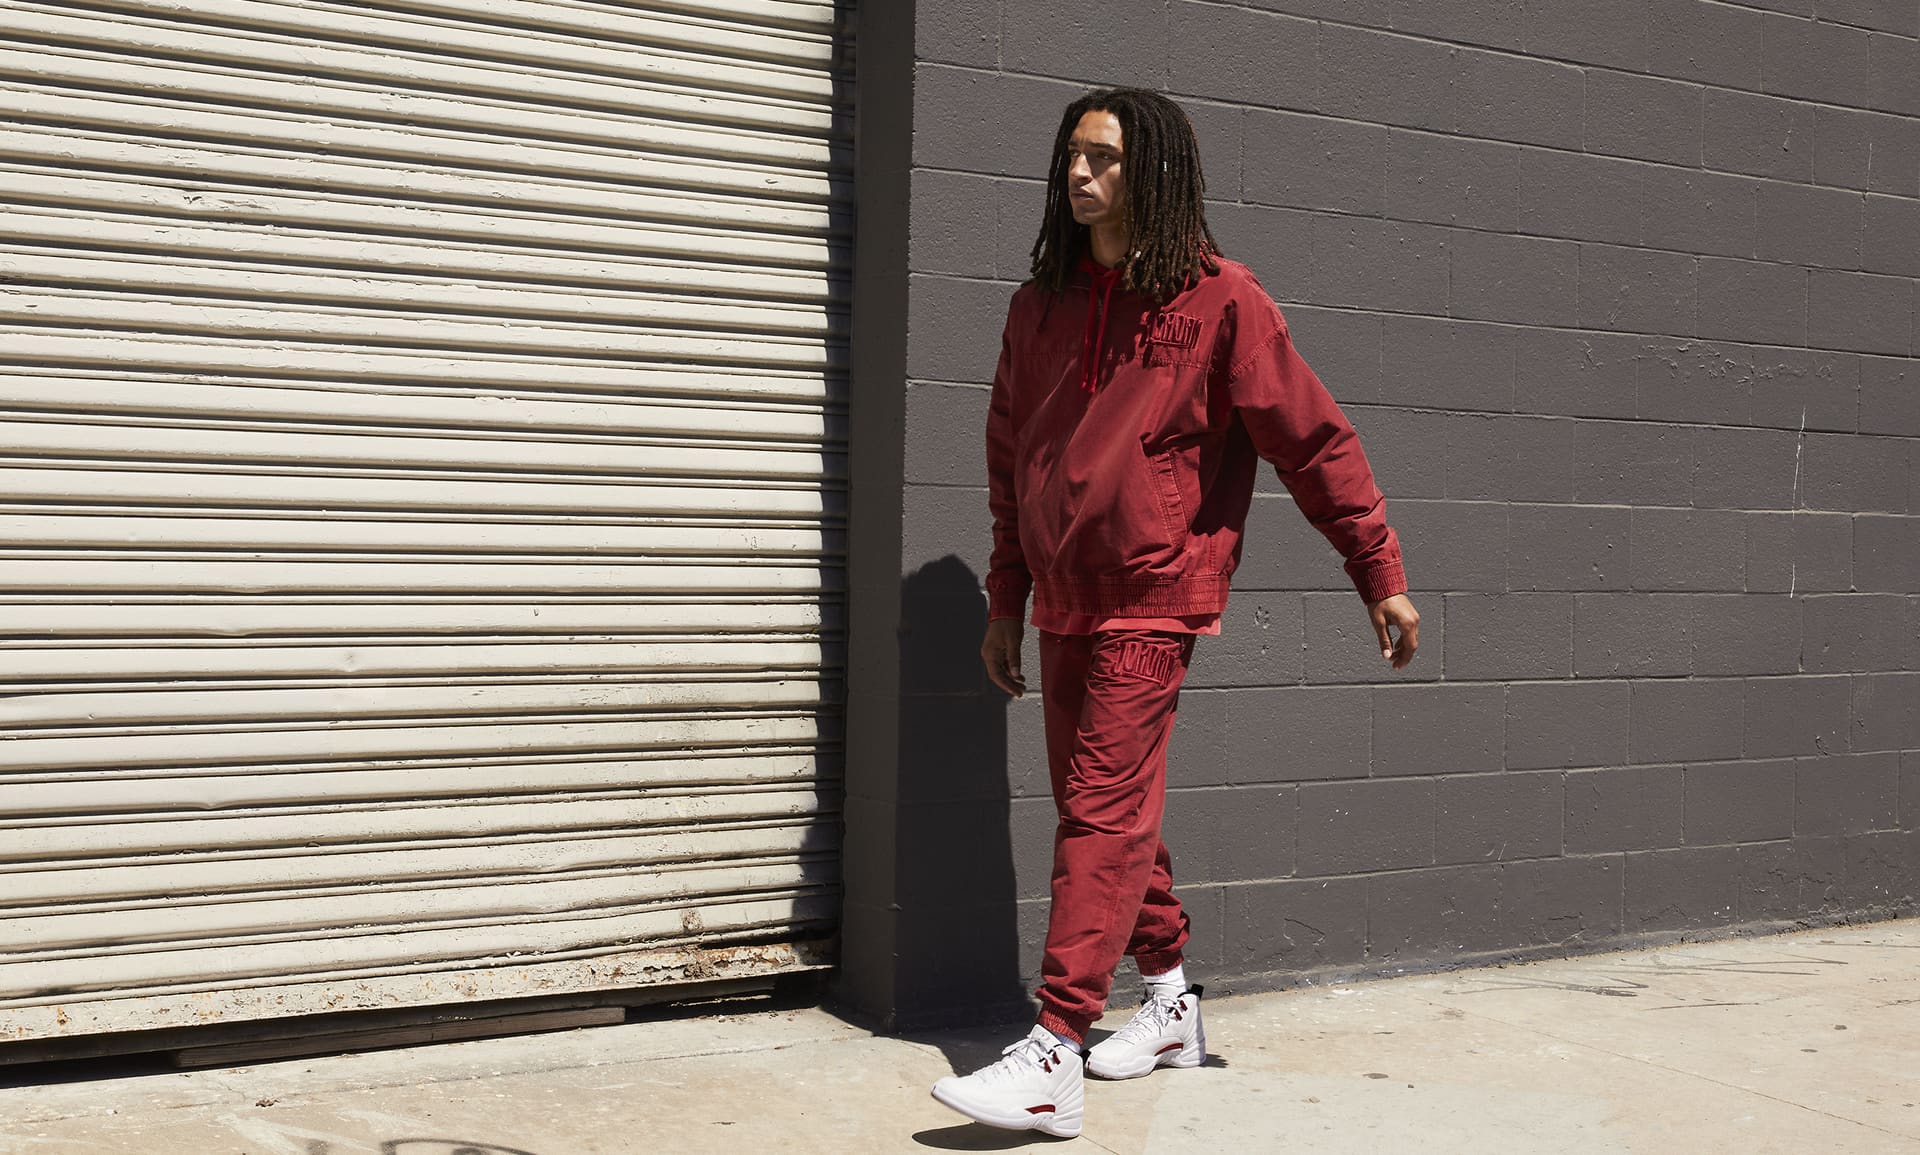 all red jordan 12 outfit